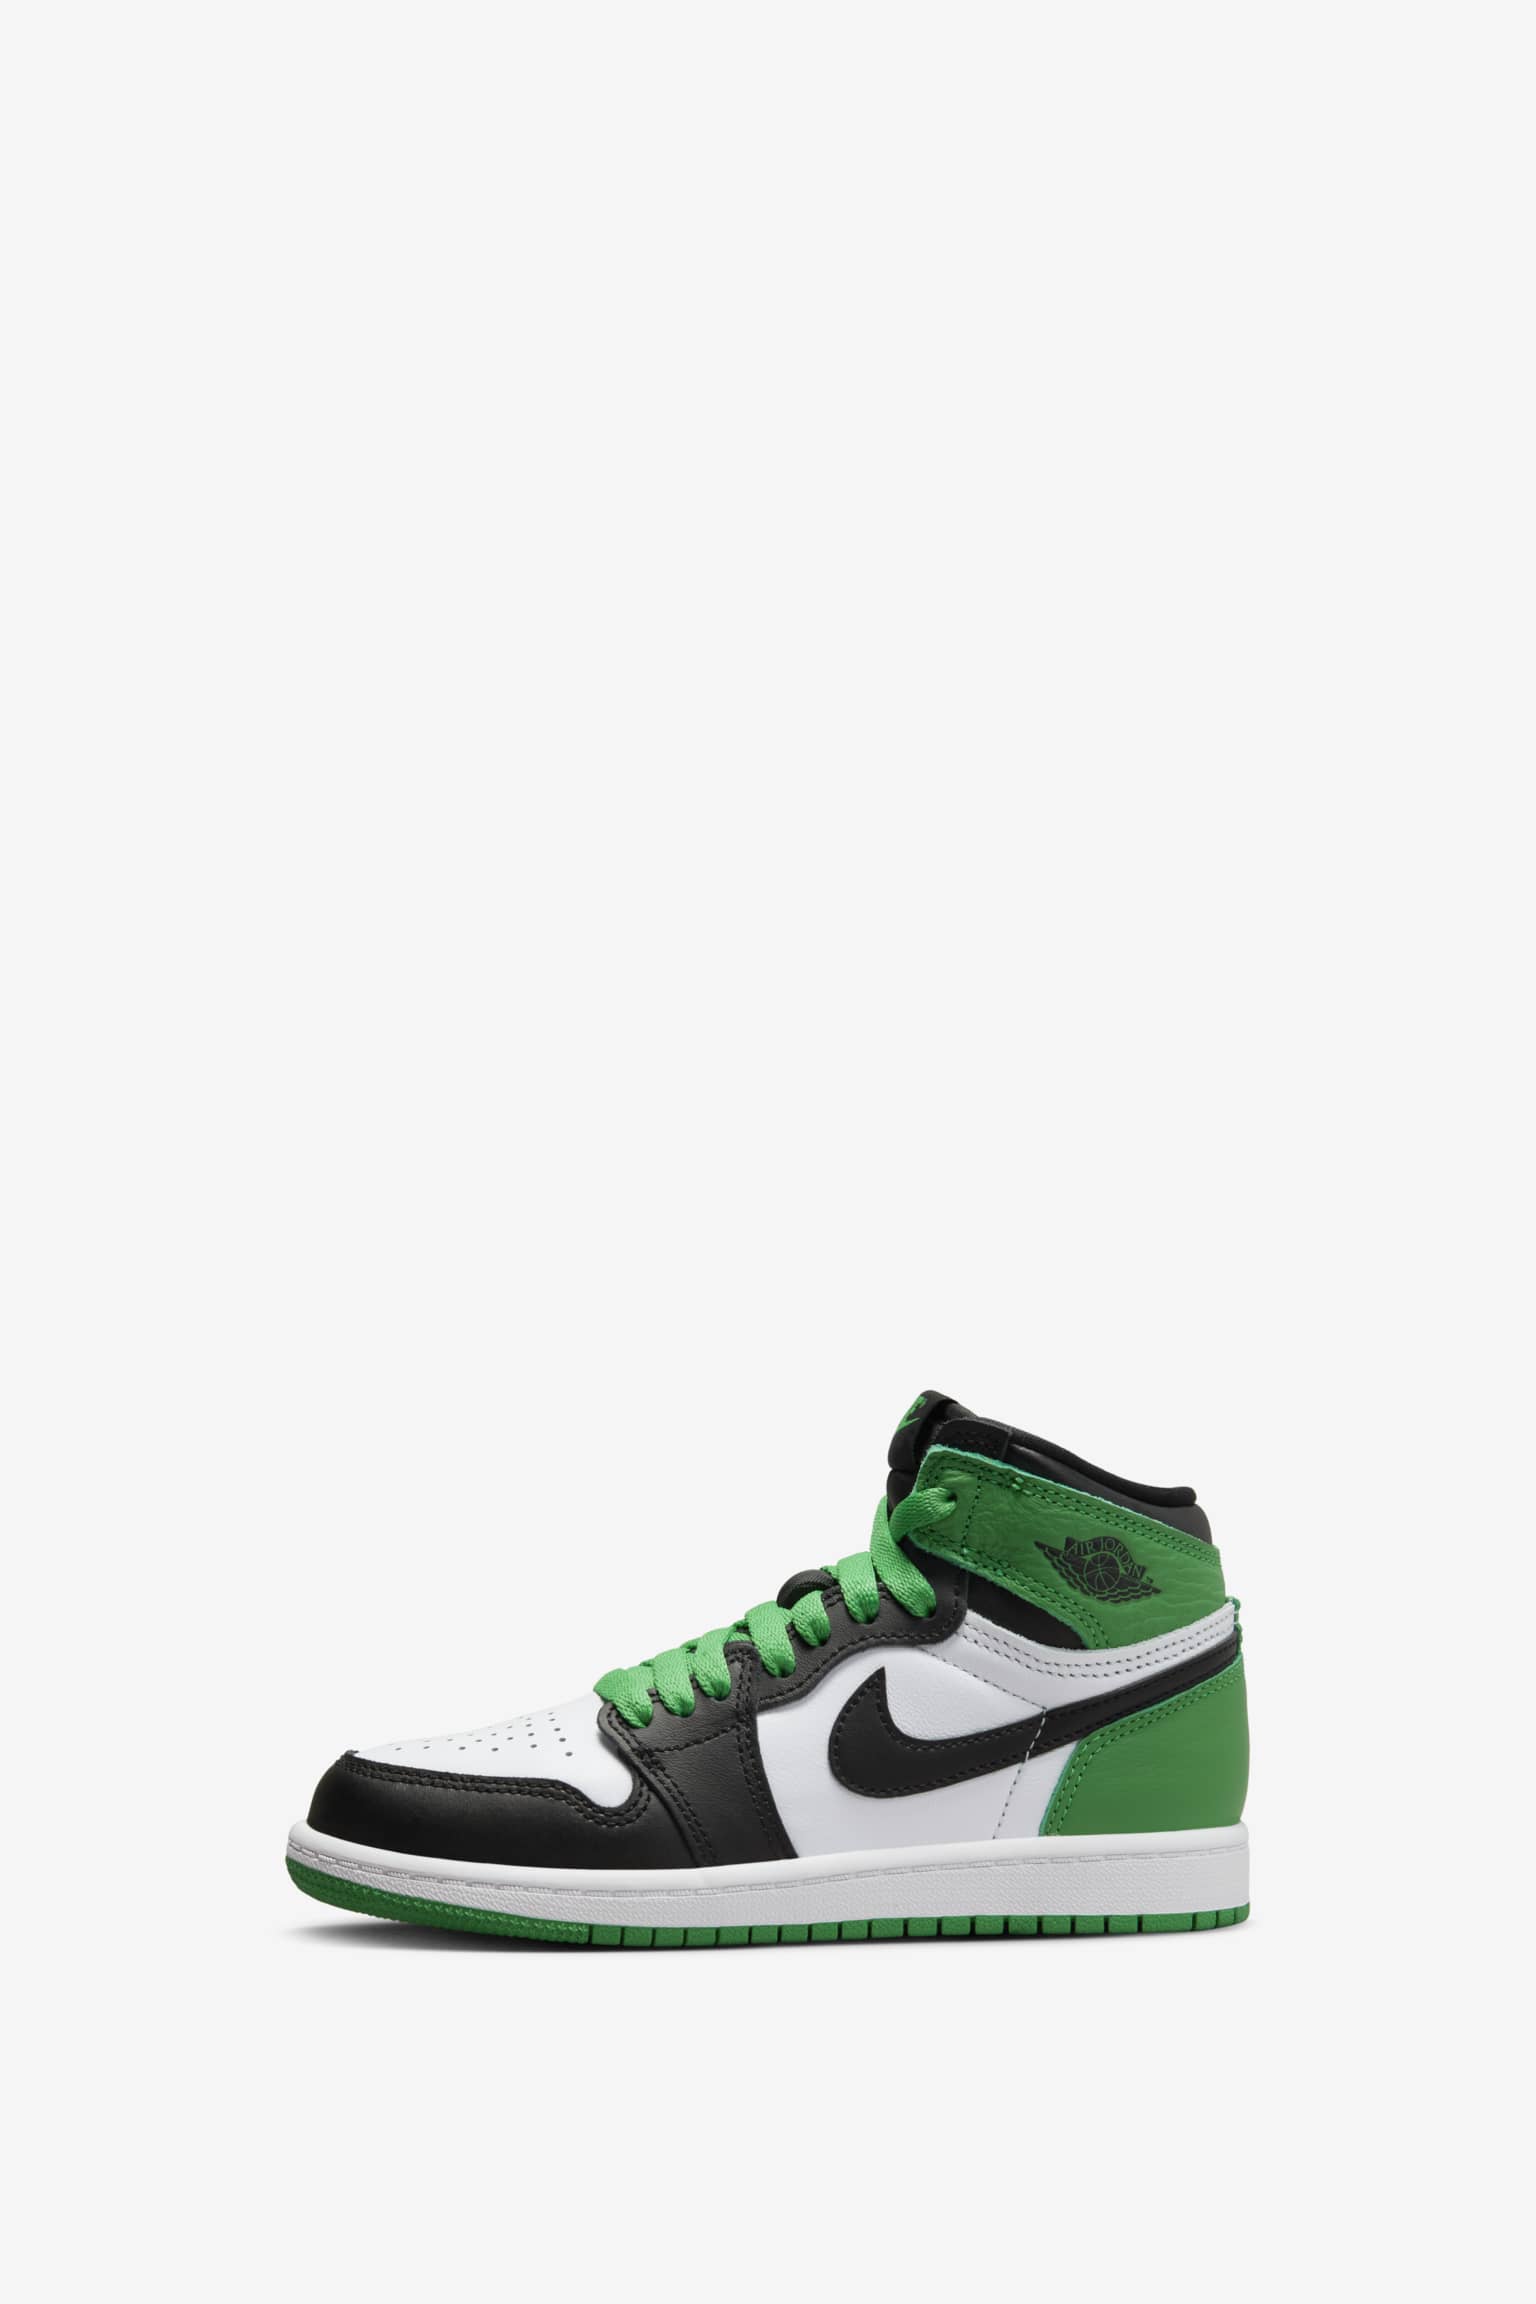 NIKE公式】エア ジョーダン 1 HIGH 'Black and Lucky Green' (DZ5485 ...